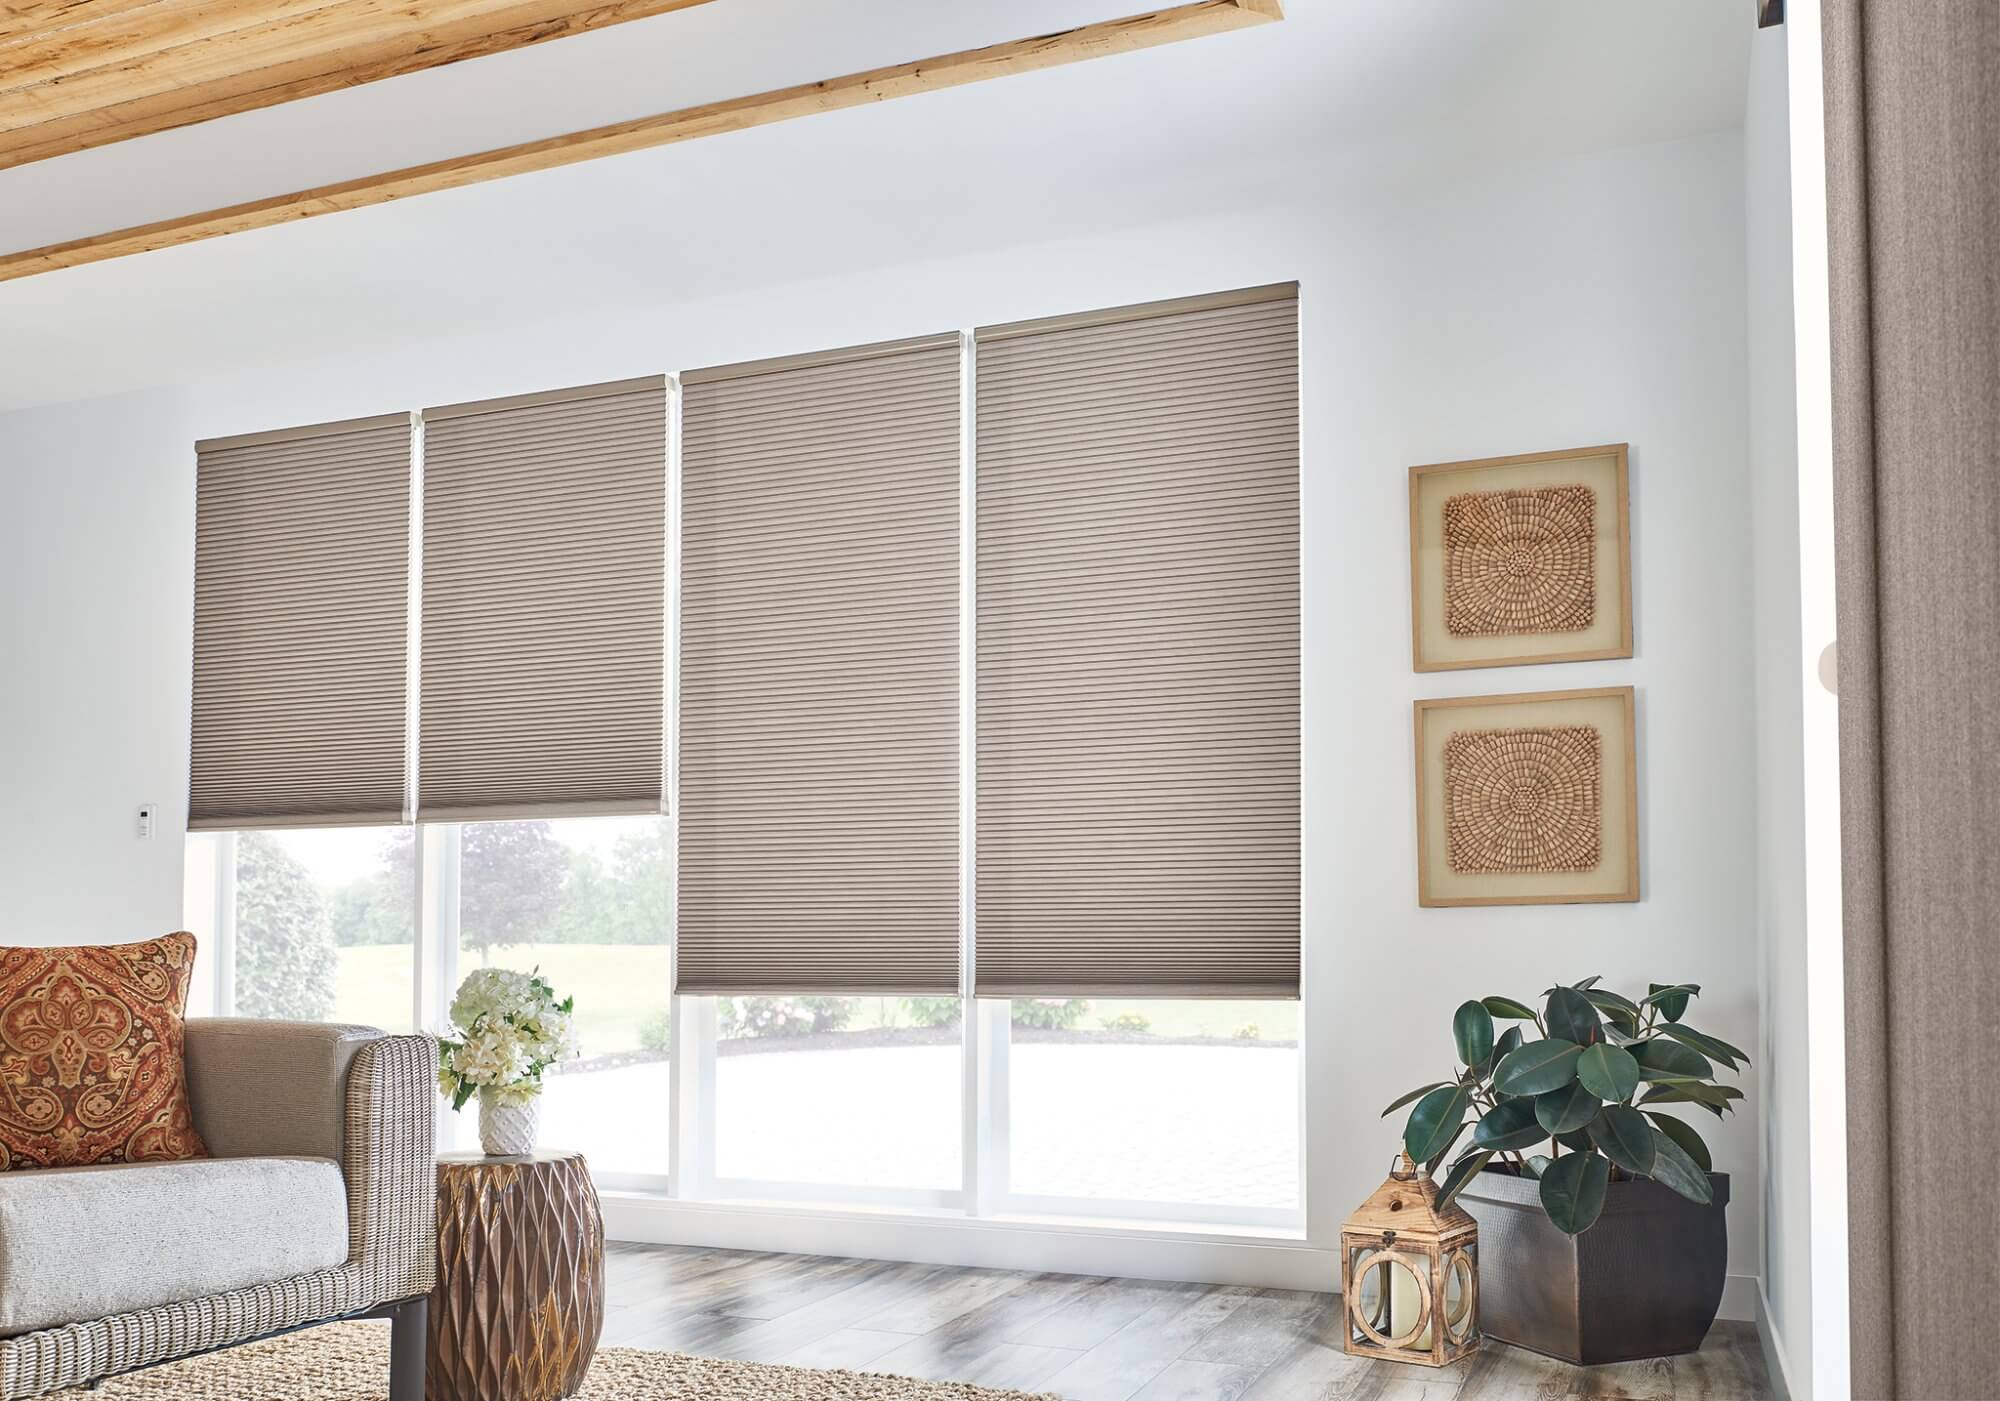 Reduce temperatures in your home with eco-friendly cellular shades.